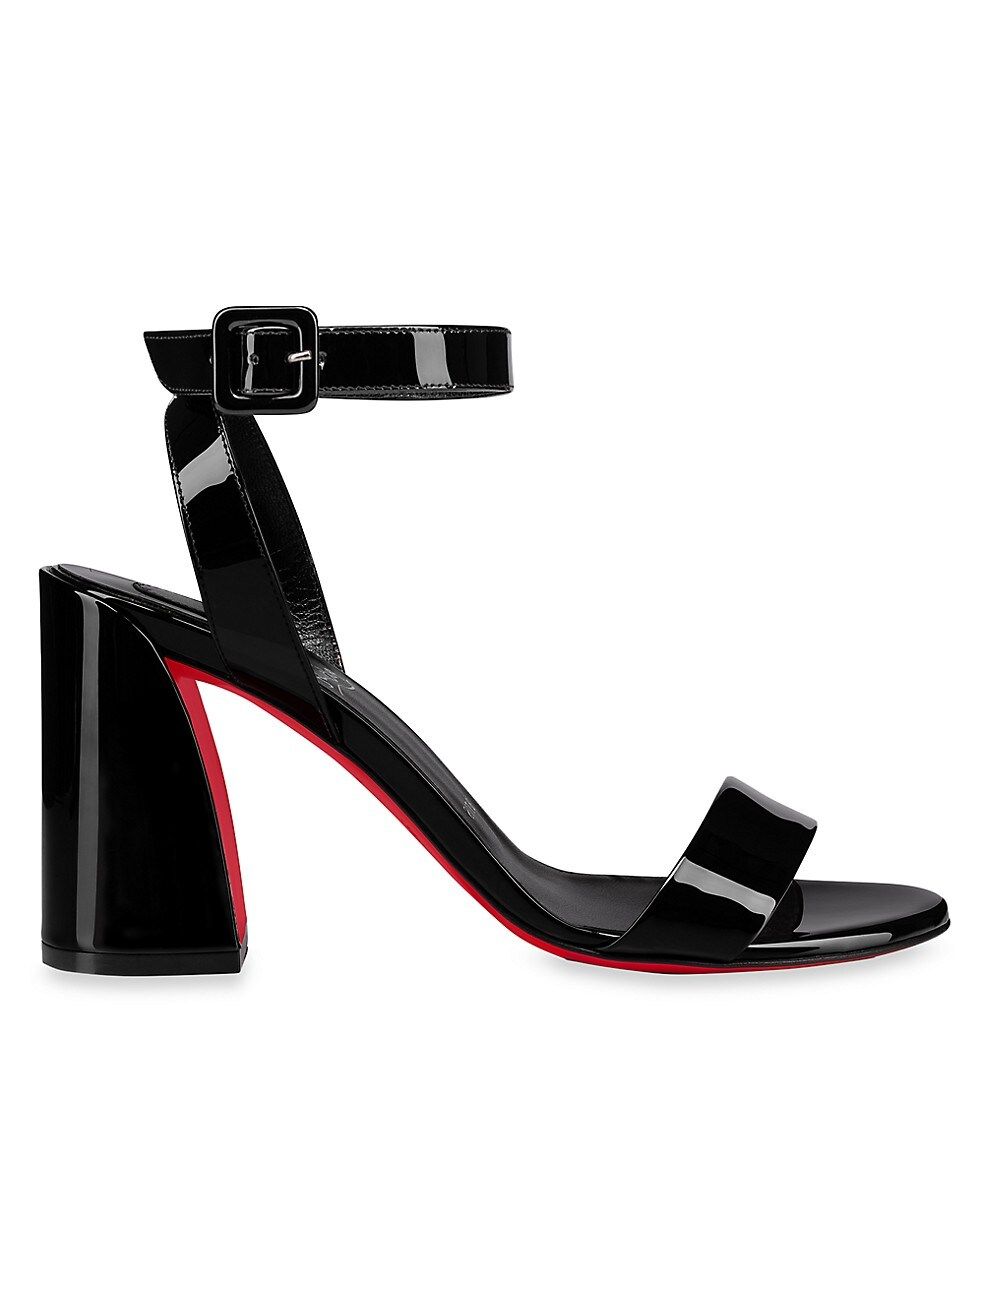 Miss Sabina 85MM Patent Leather Sandals | Saks Fifth Avenue